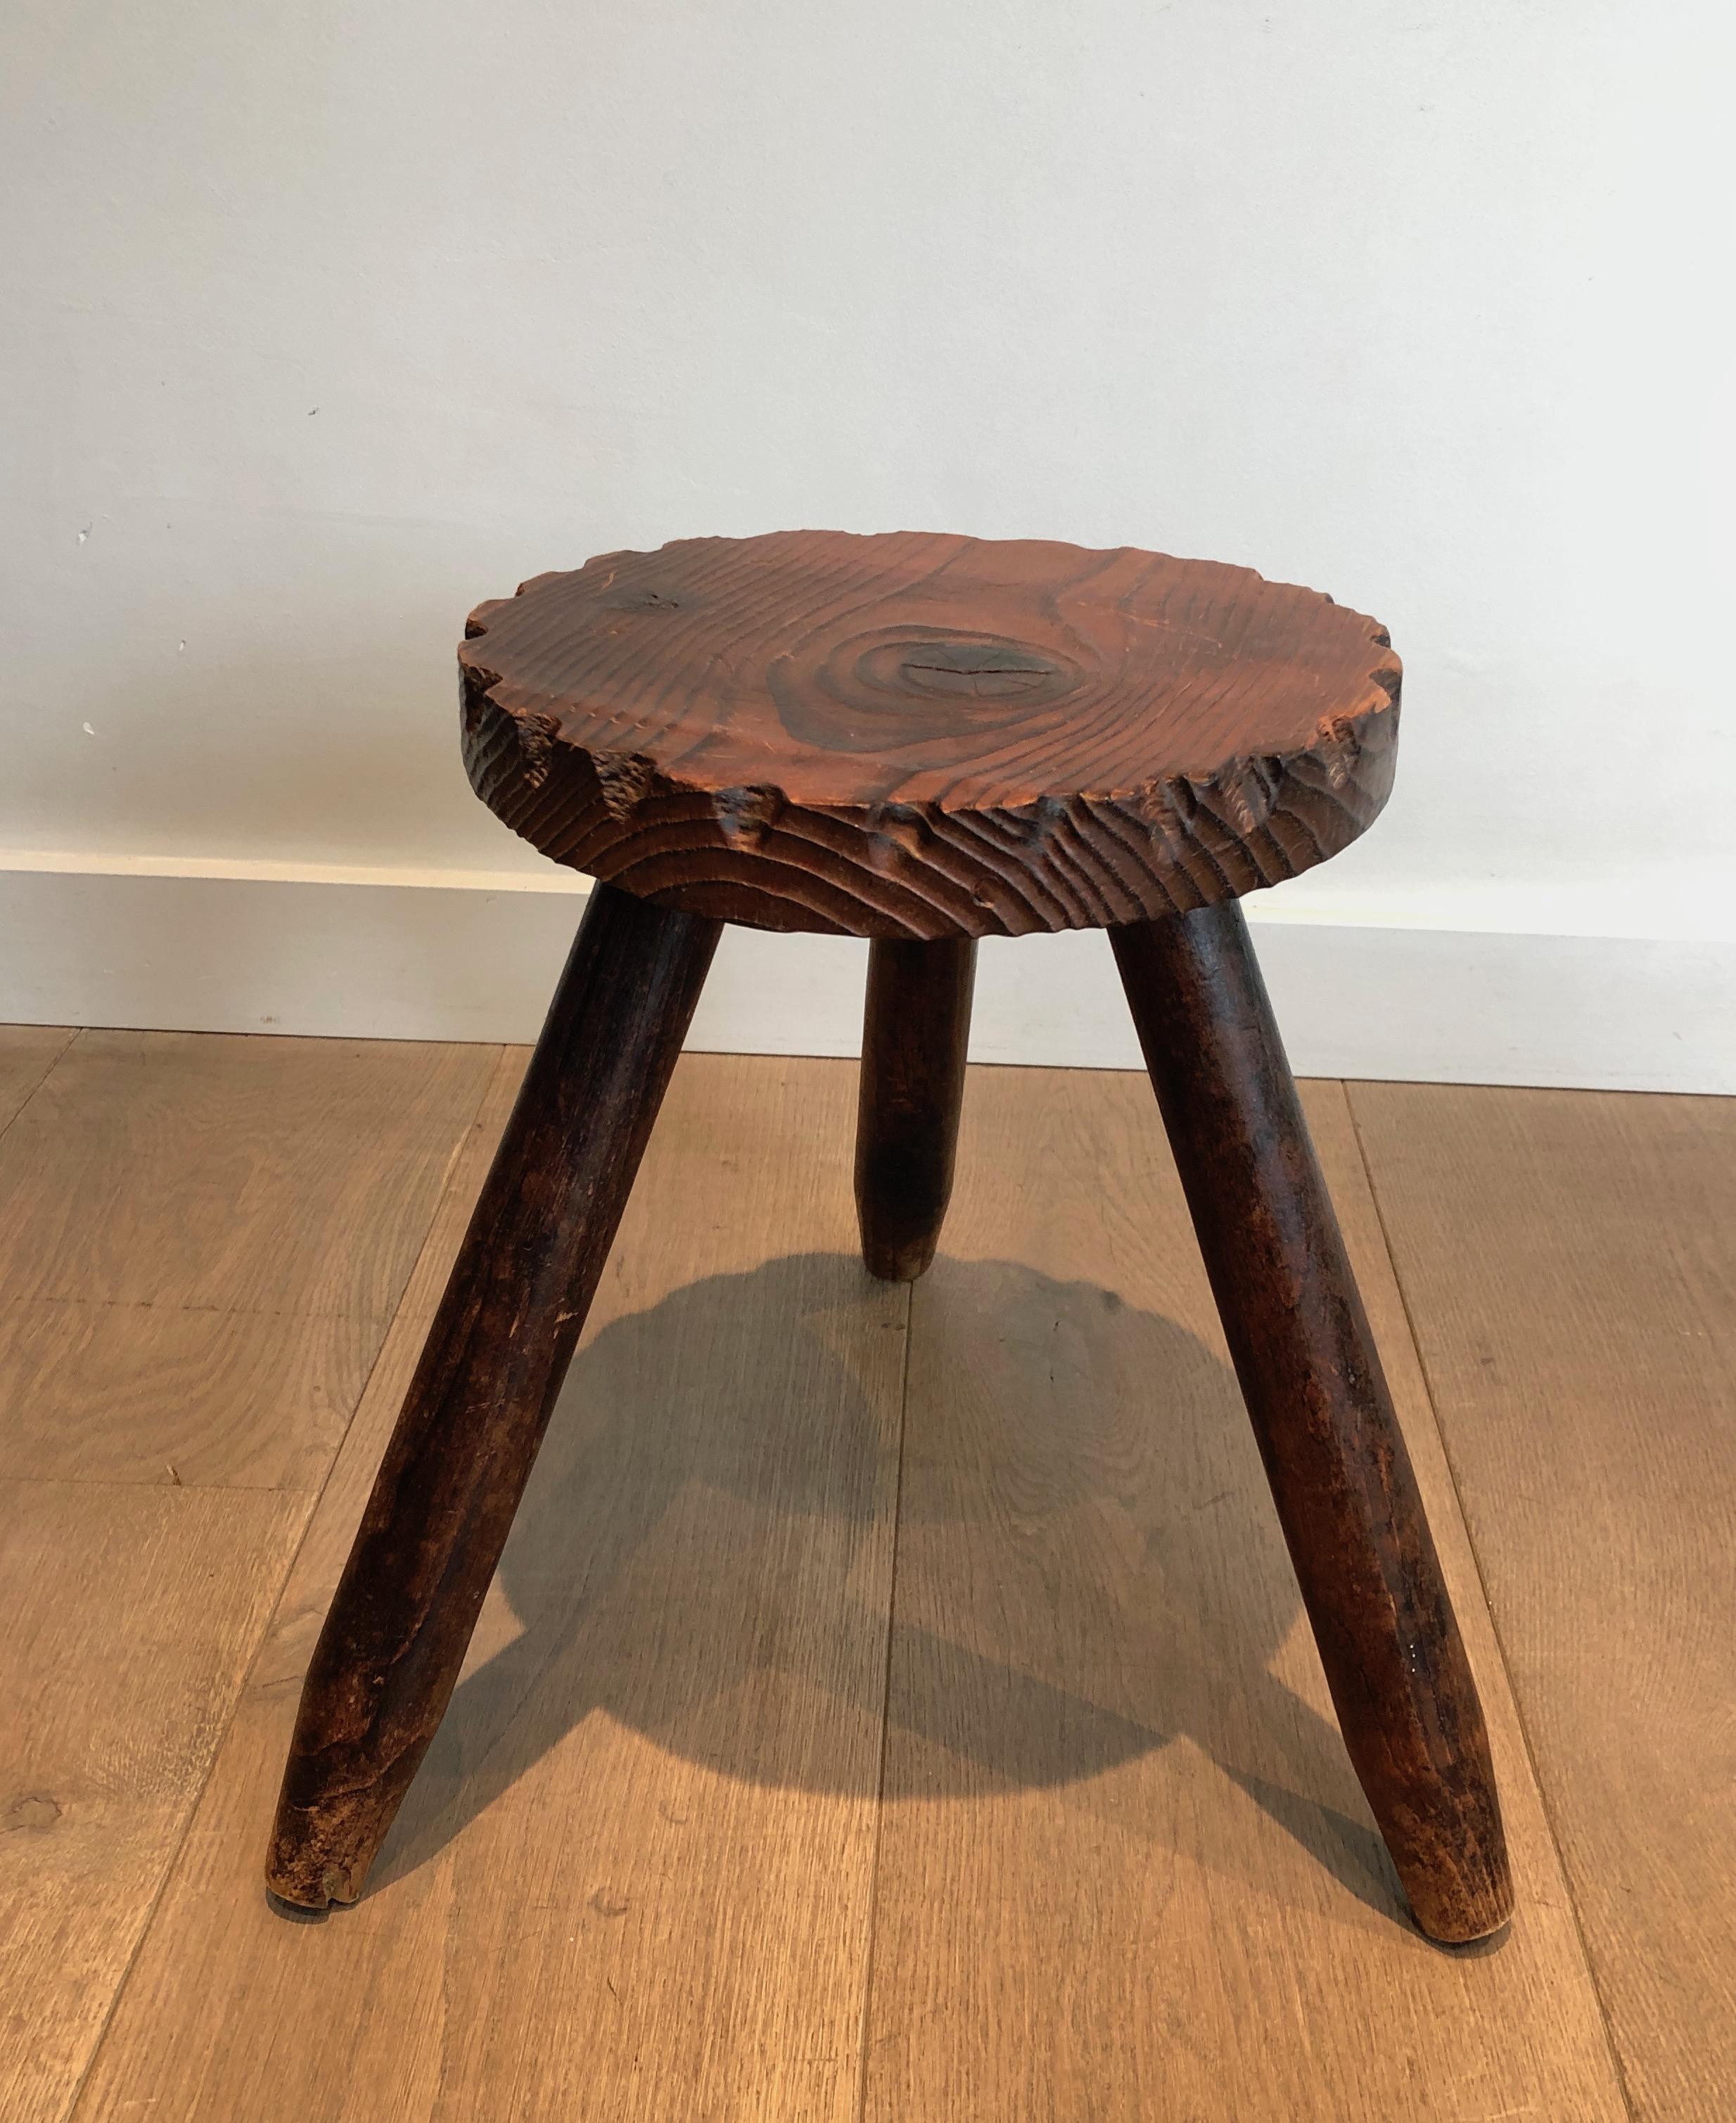 Pair of Pine Brutalist Stools, French Work, circa 1950 For Sale 4